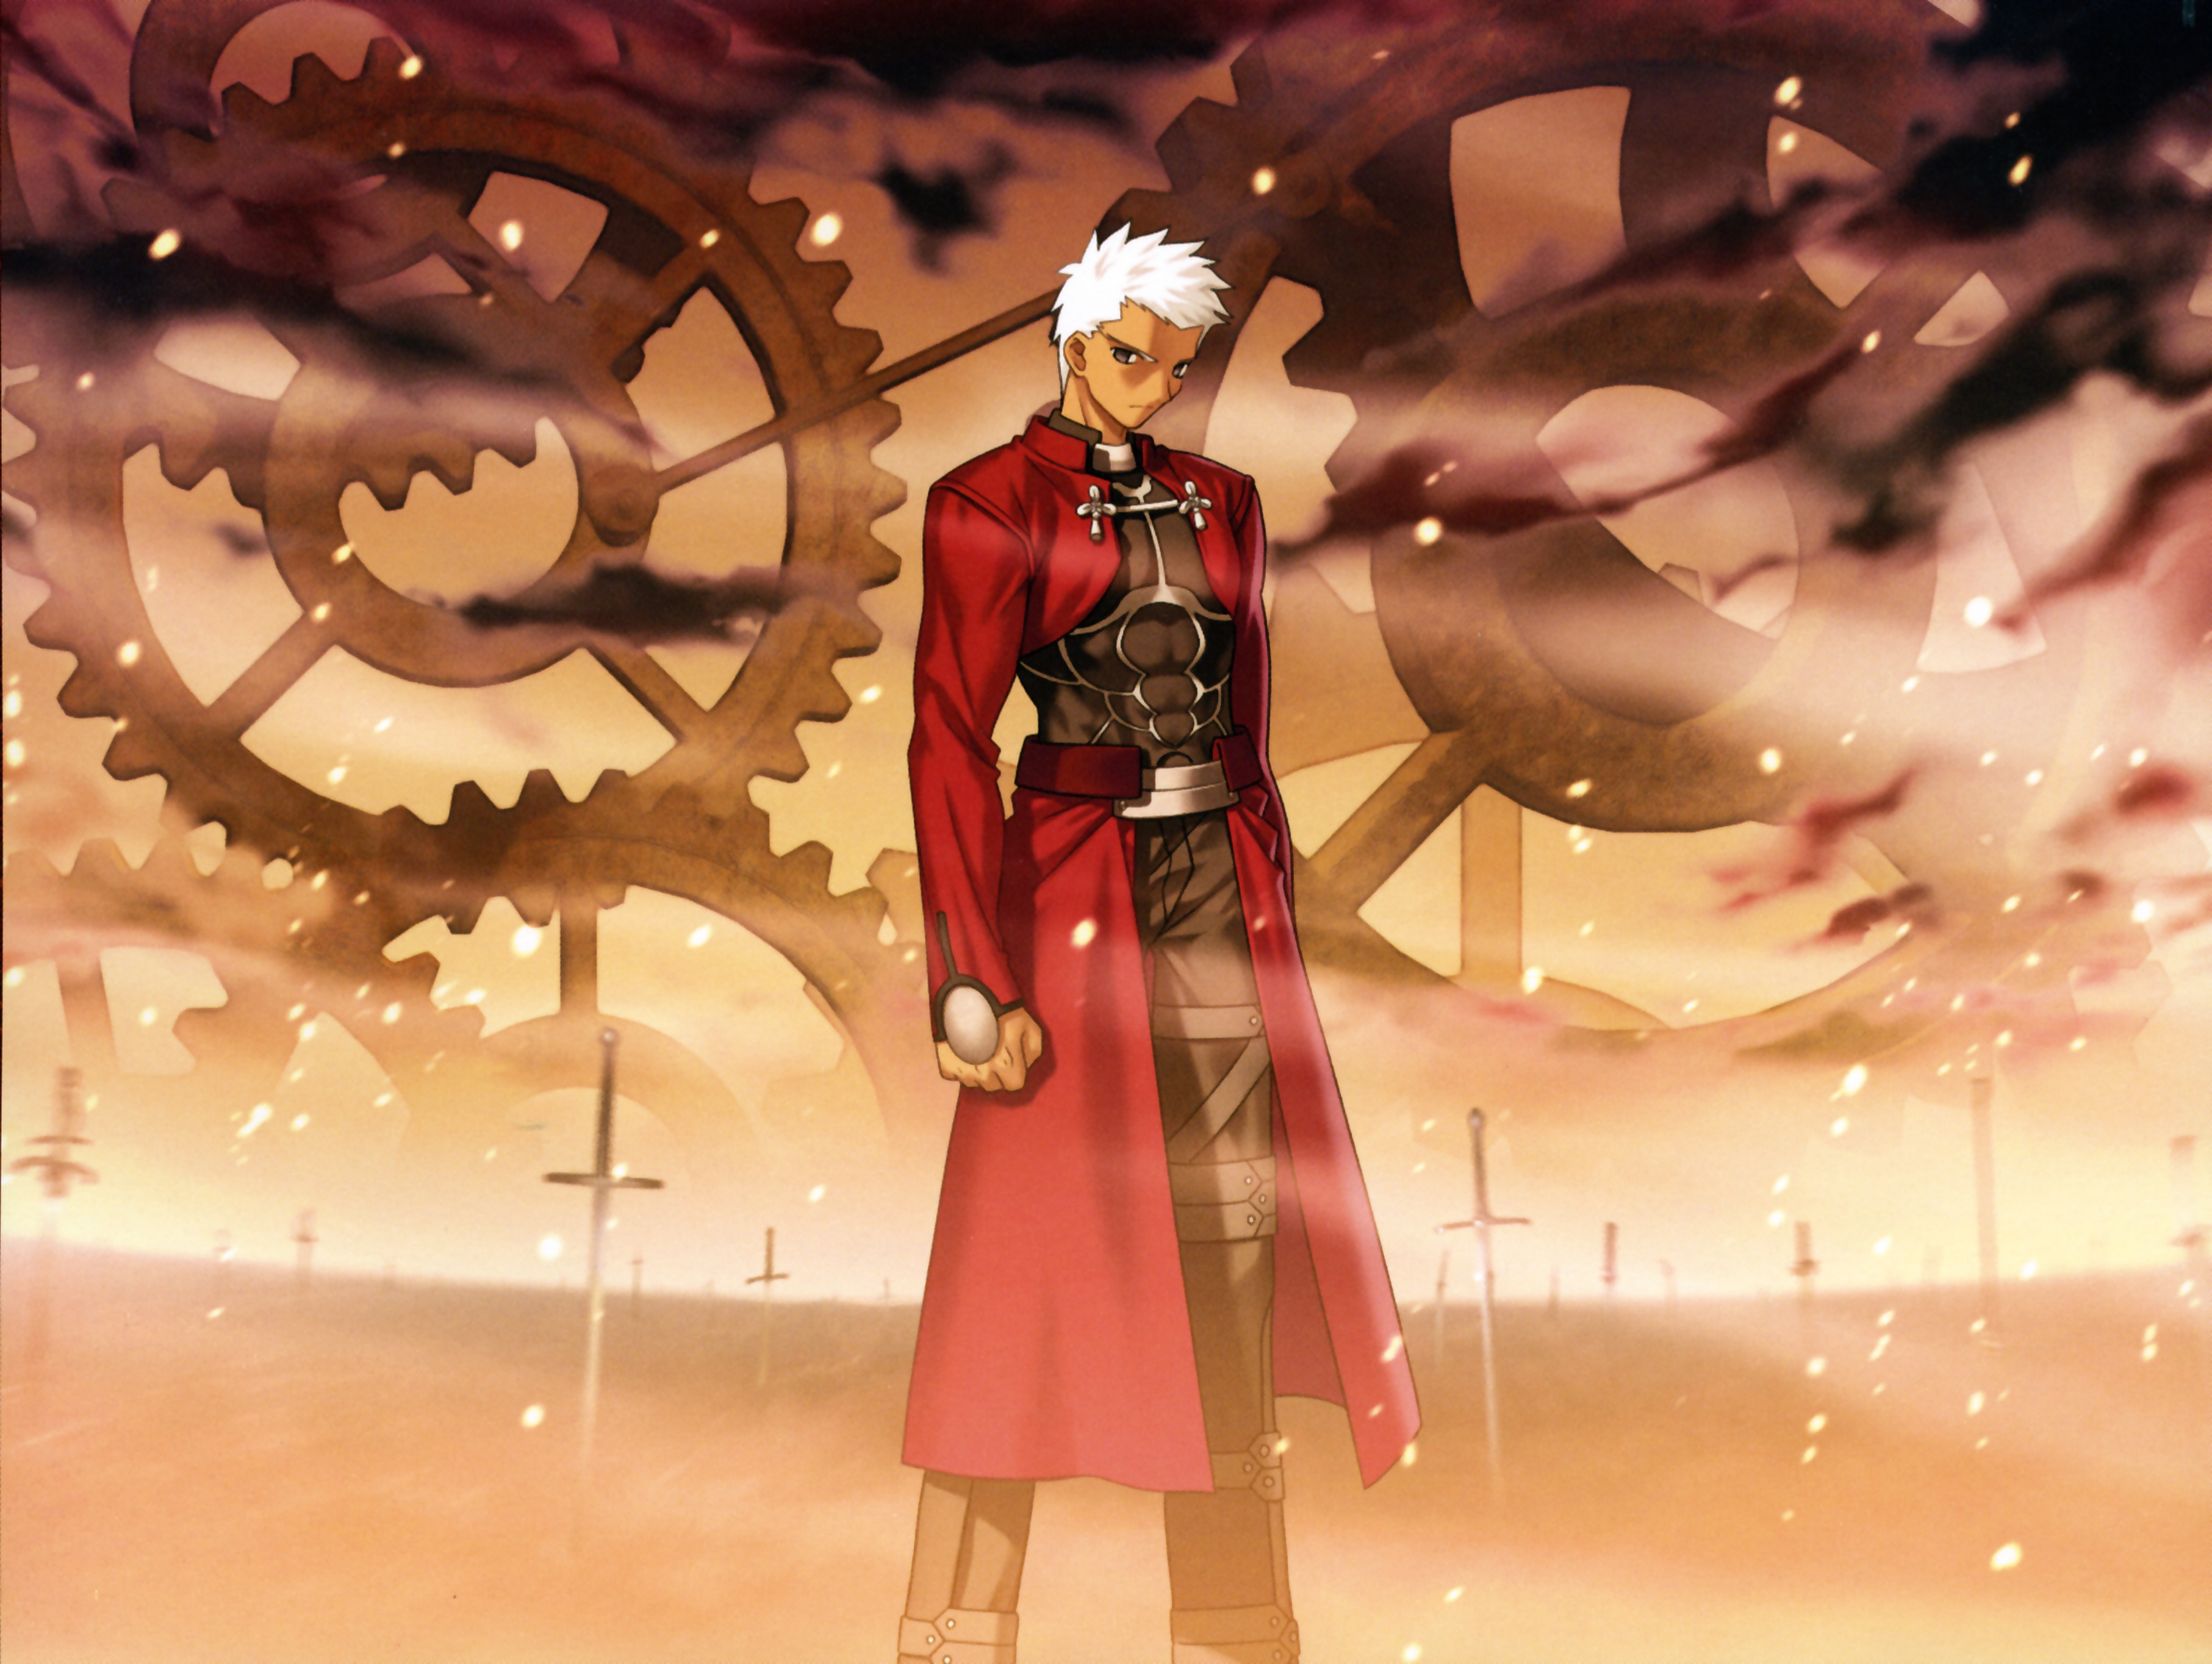 Fate Stay Night Anime Archer Fate Stay Night Fate Series Free Wallpaper Wallpaperjam Com